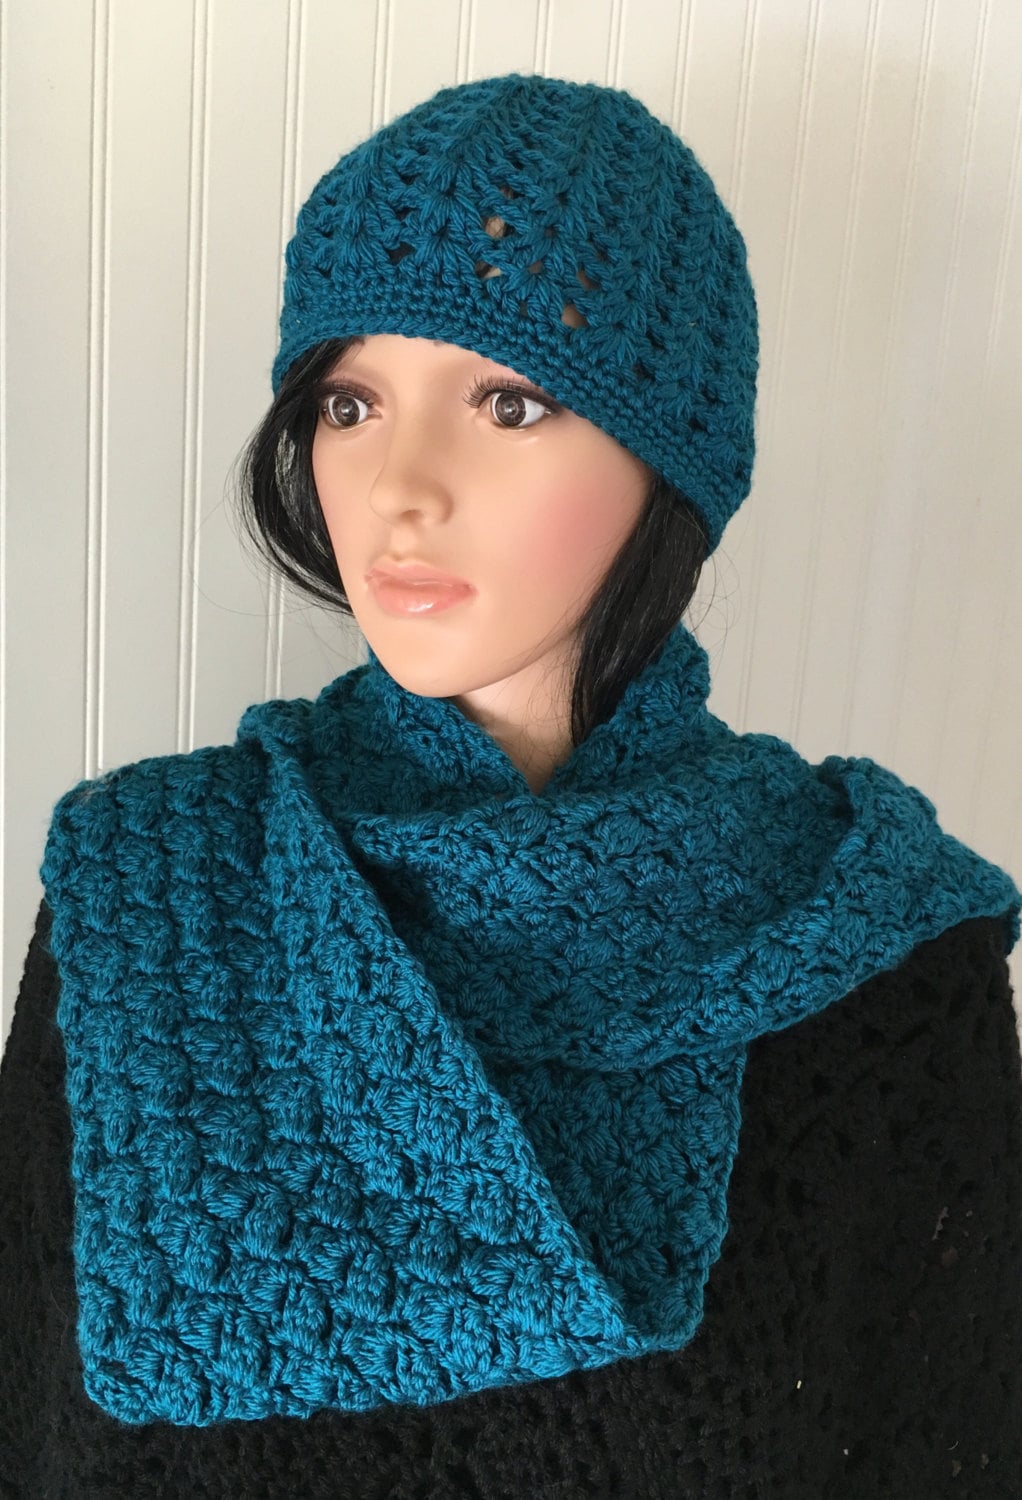 Crochet hat and scarf set woman winter accessory teal hat